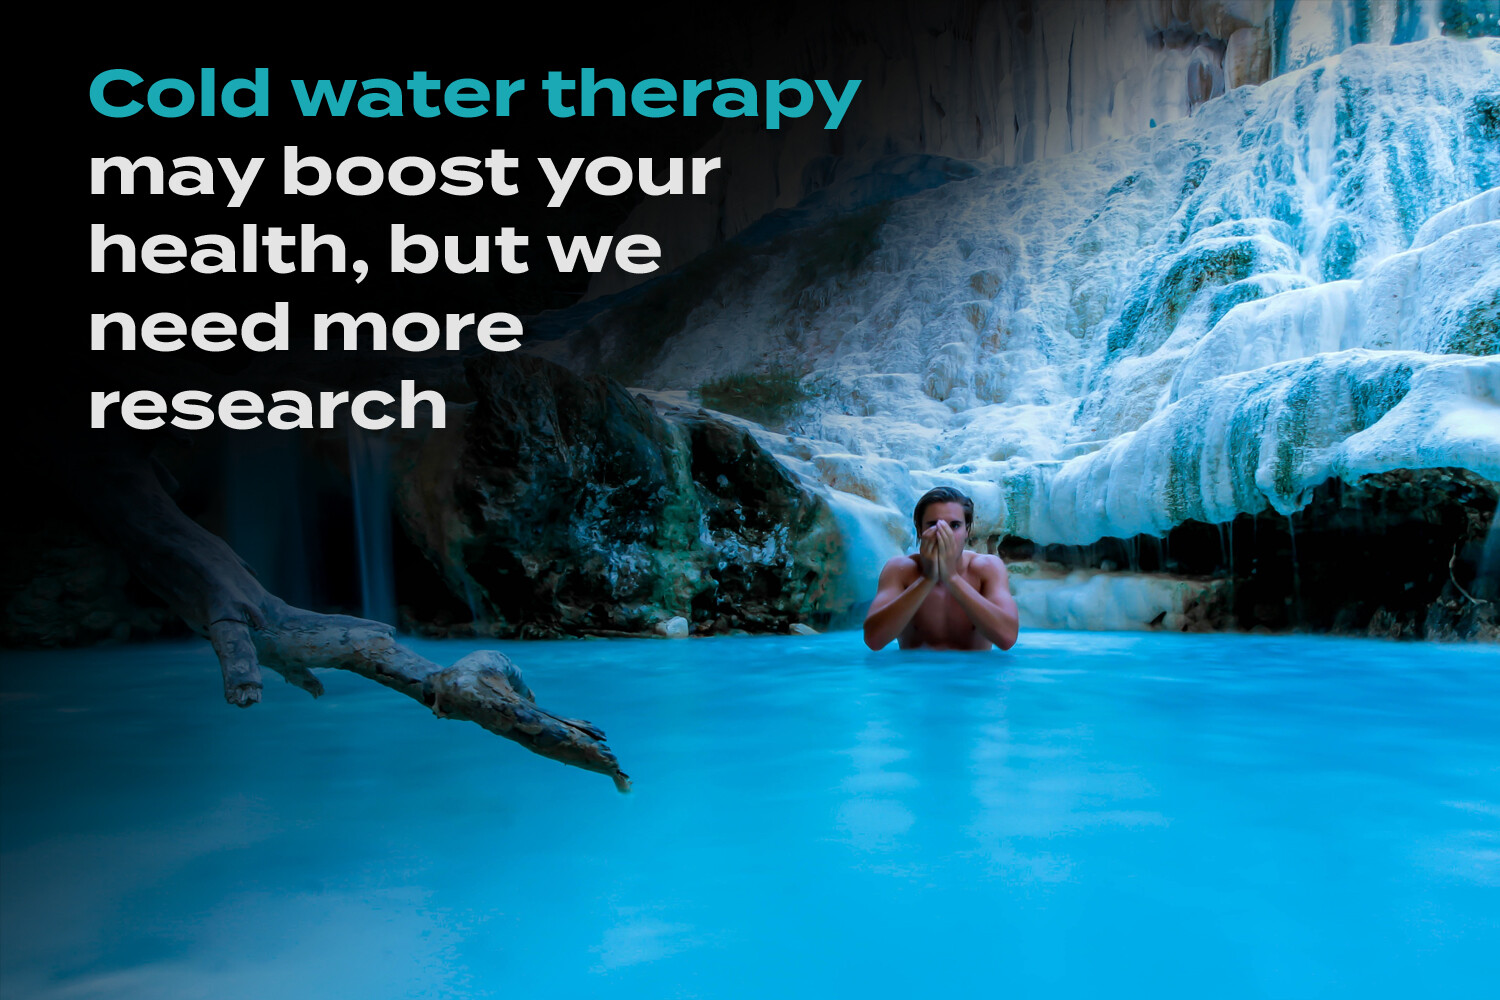 Jumping Into Cold Water Might Not Be as Crazy as it Sounds - StoryMD